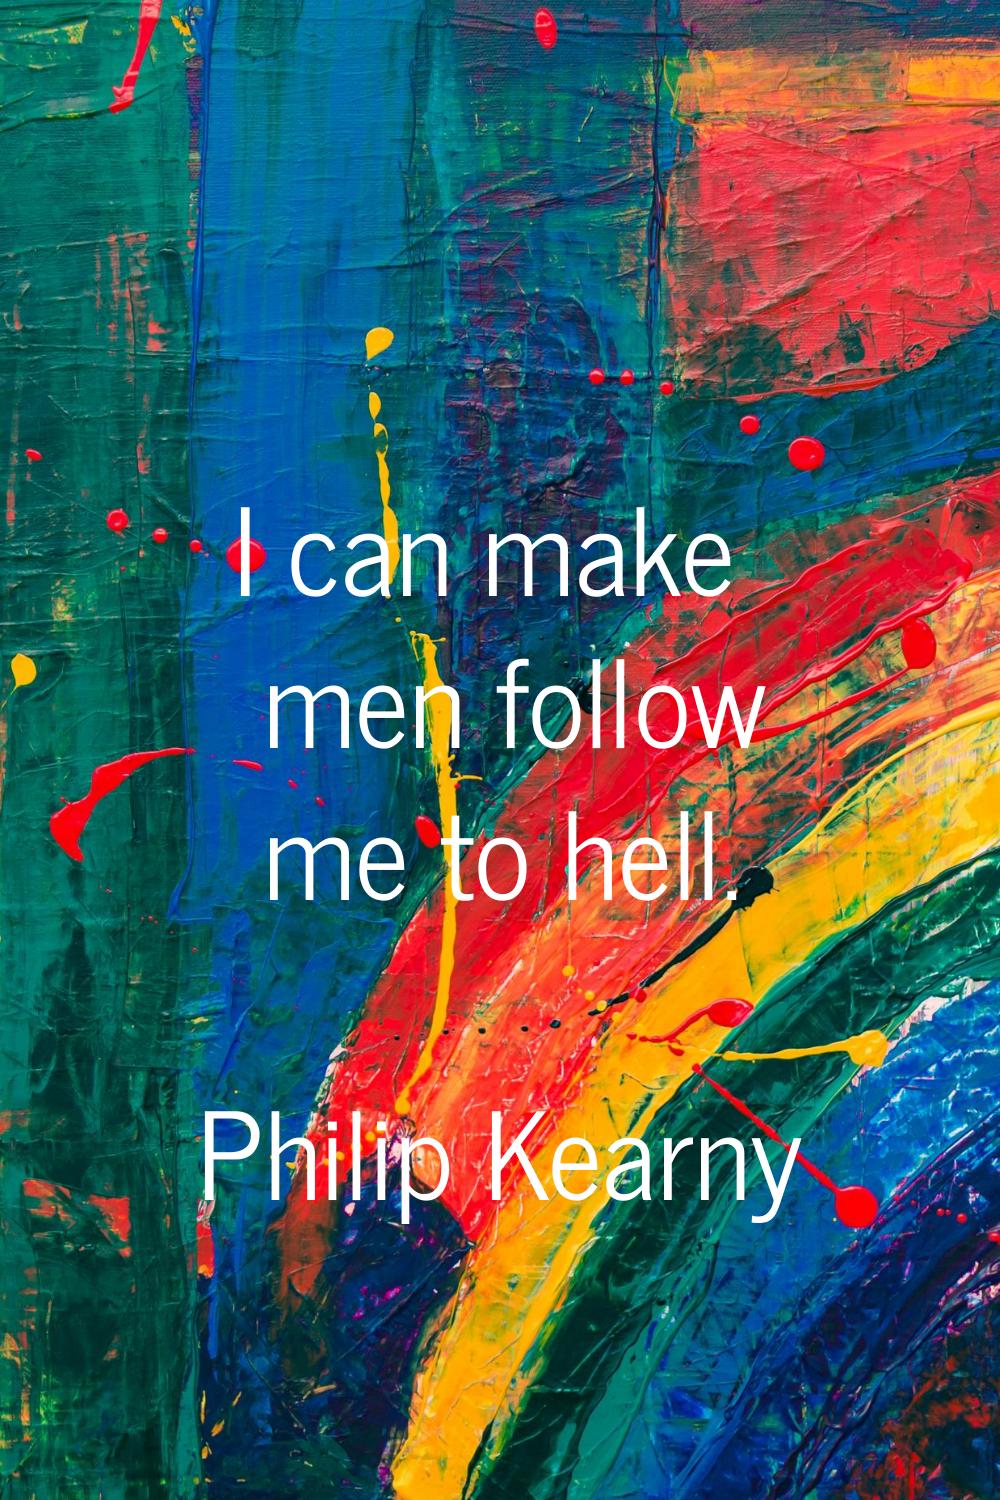 I can make men follow me to hell.